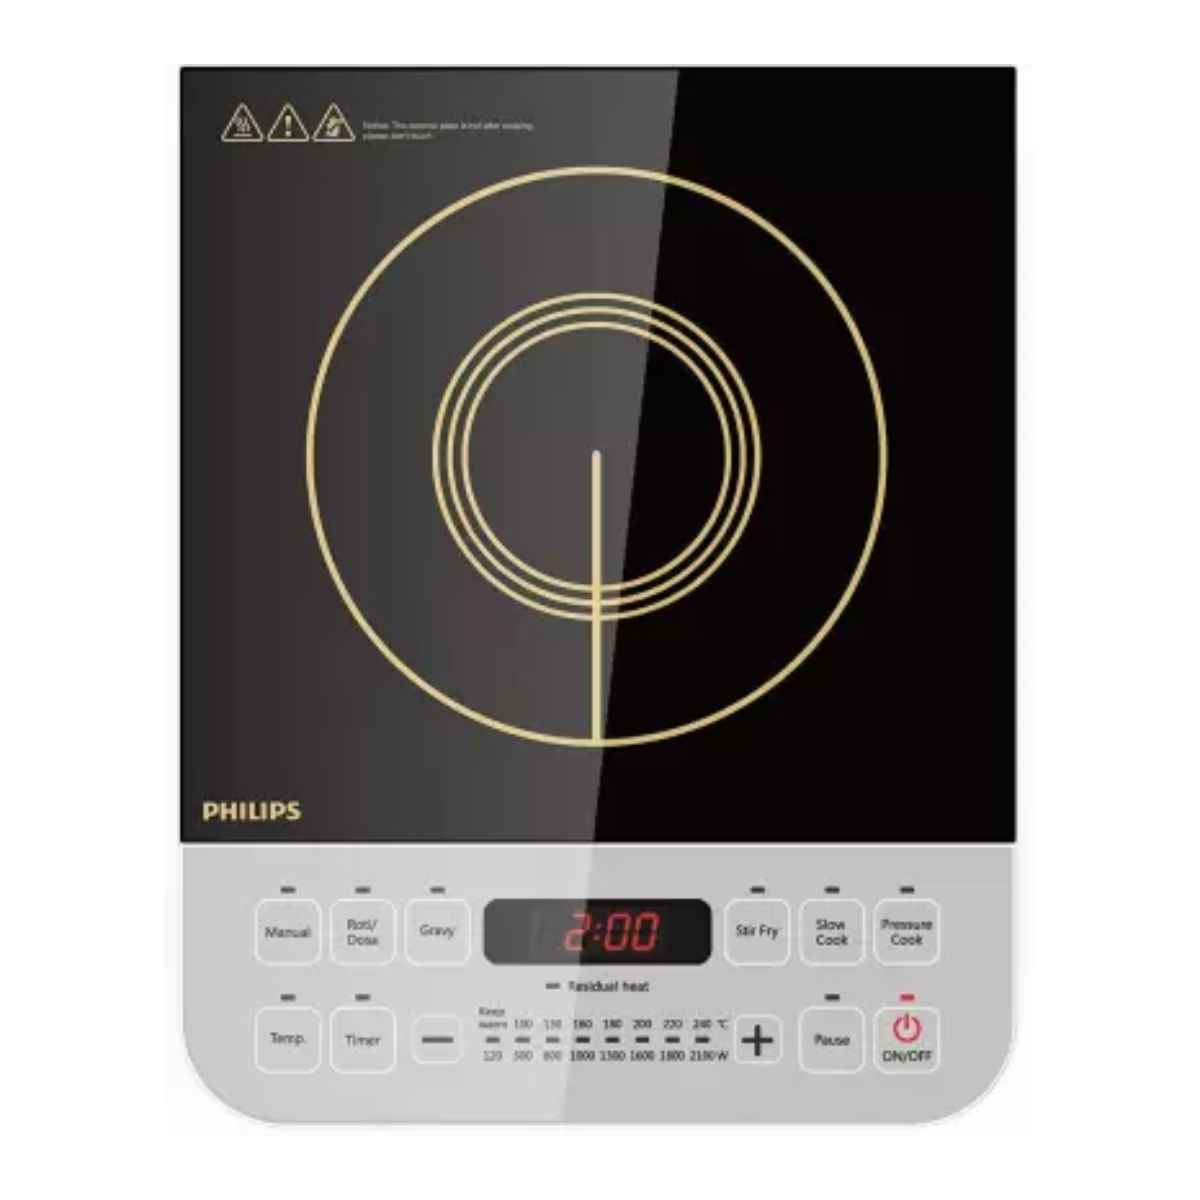 PHILIPS HD4928/01 Induction Cooktop